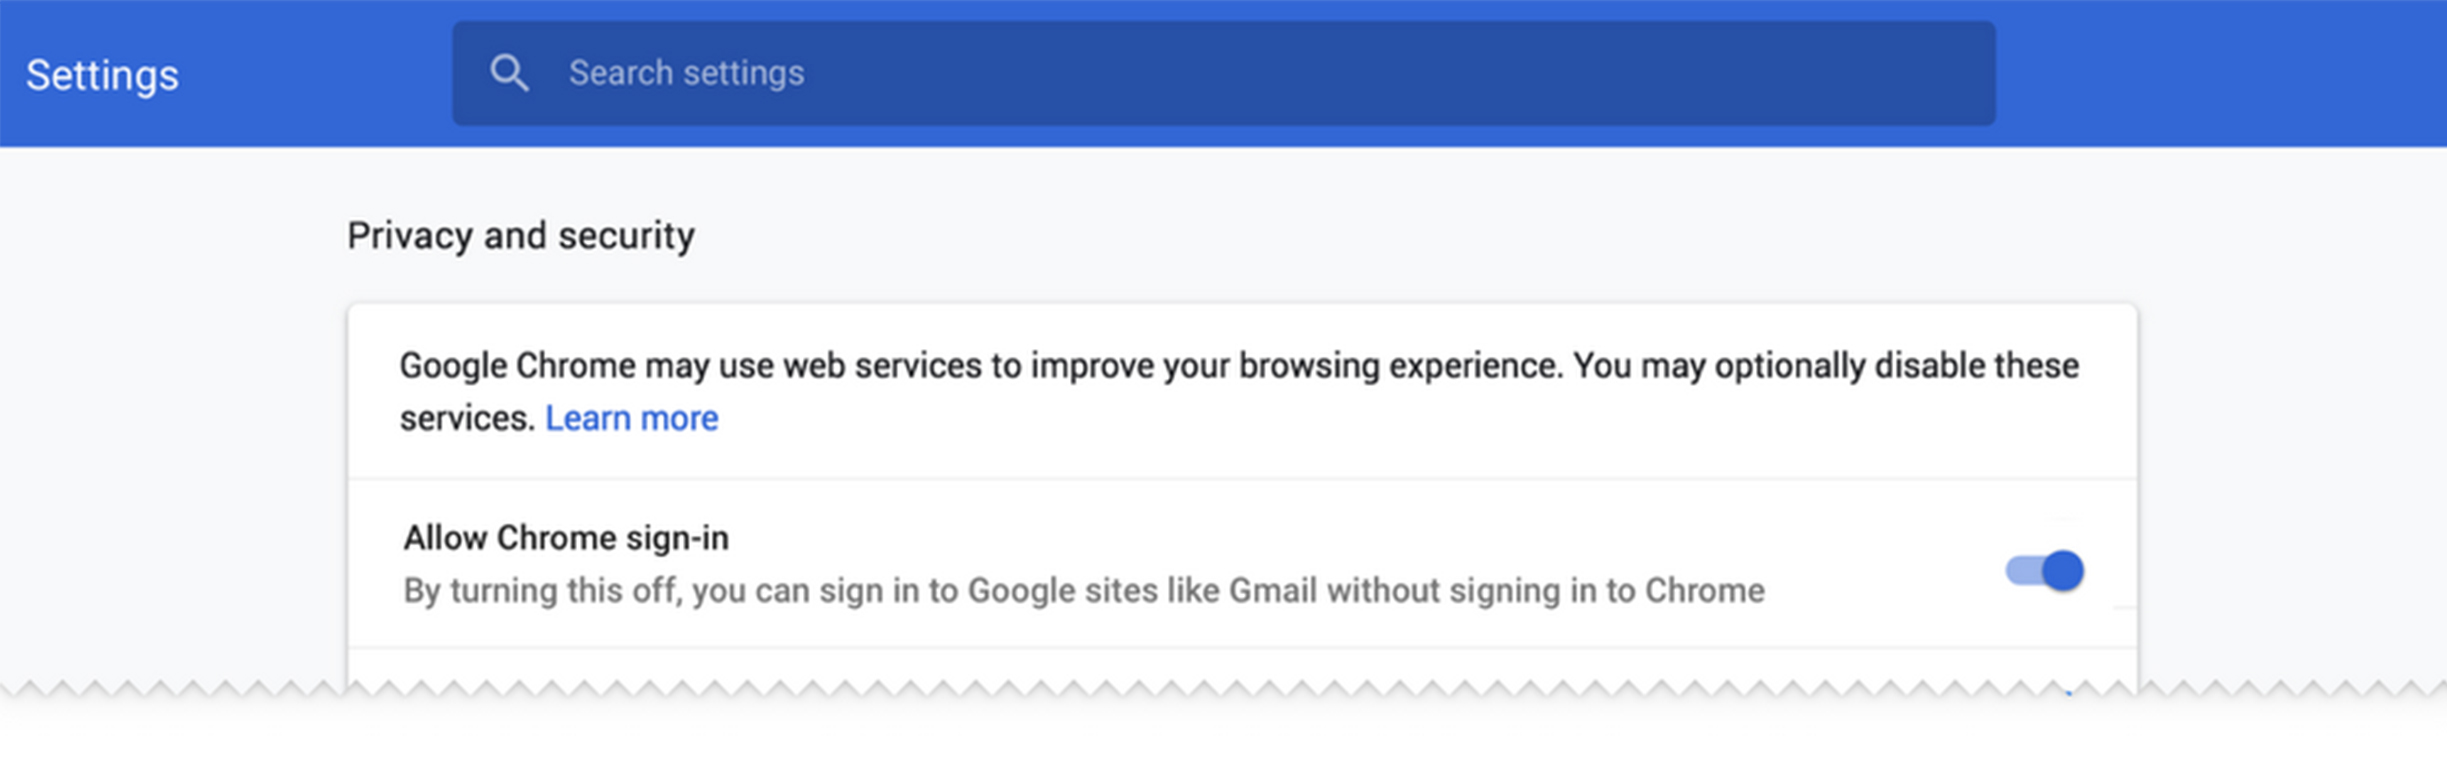 Sign-in settings in Chrome